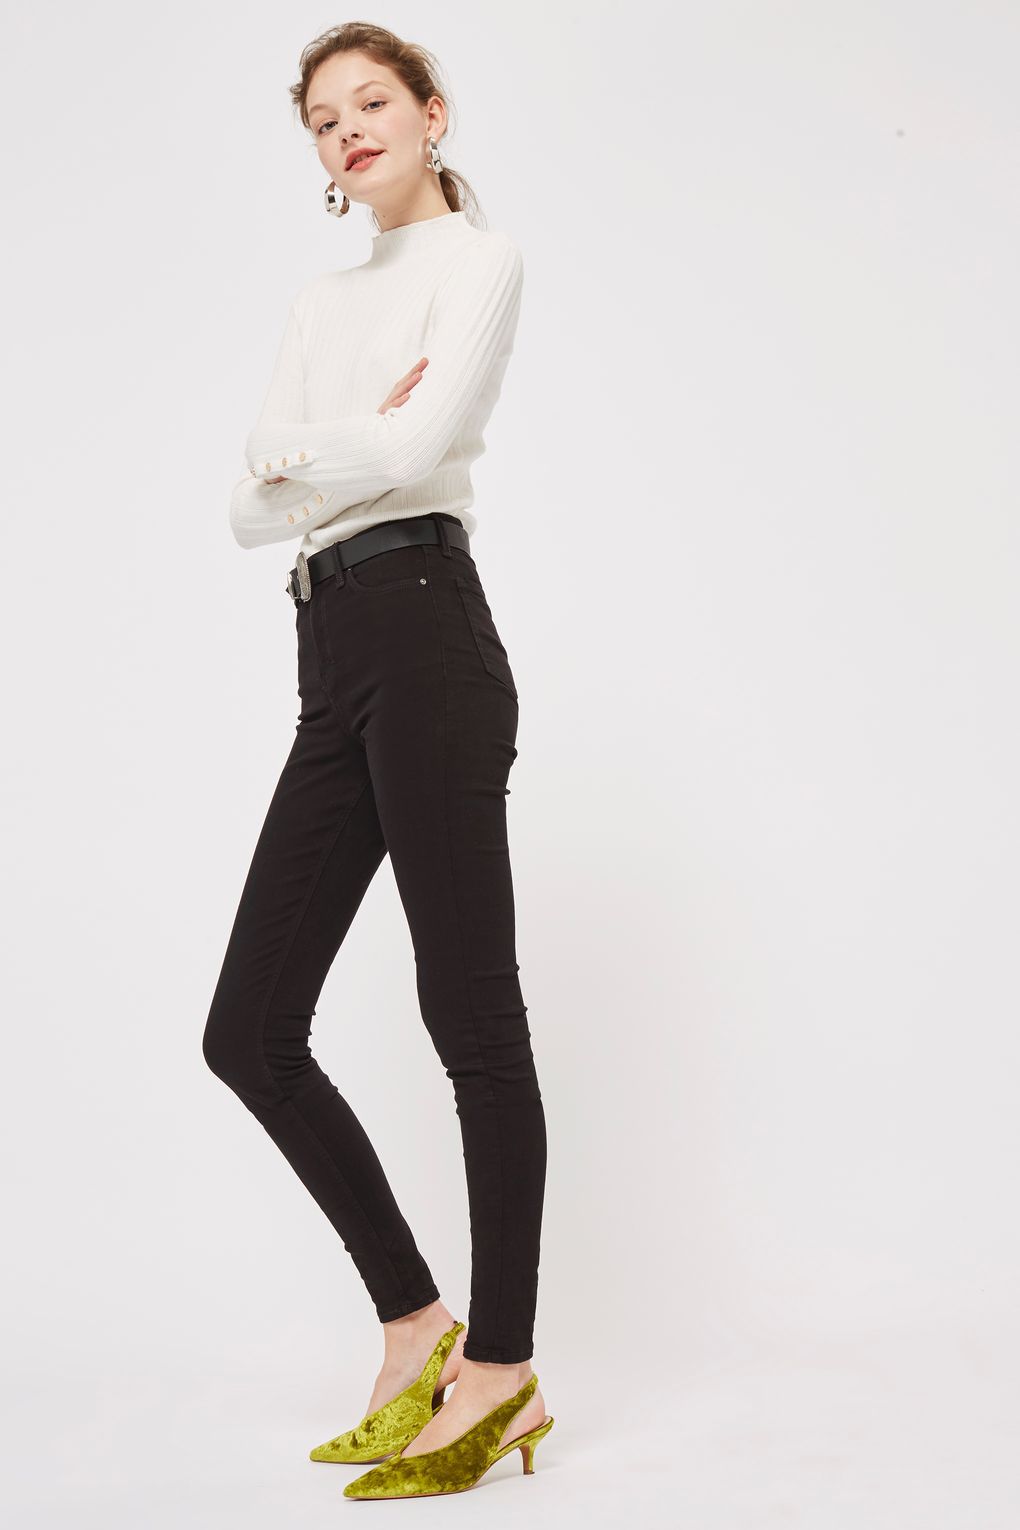 A model wearing black skinny jeans and a white turtleneck